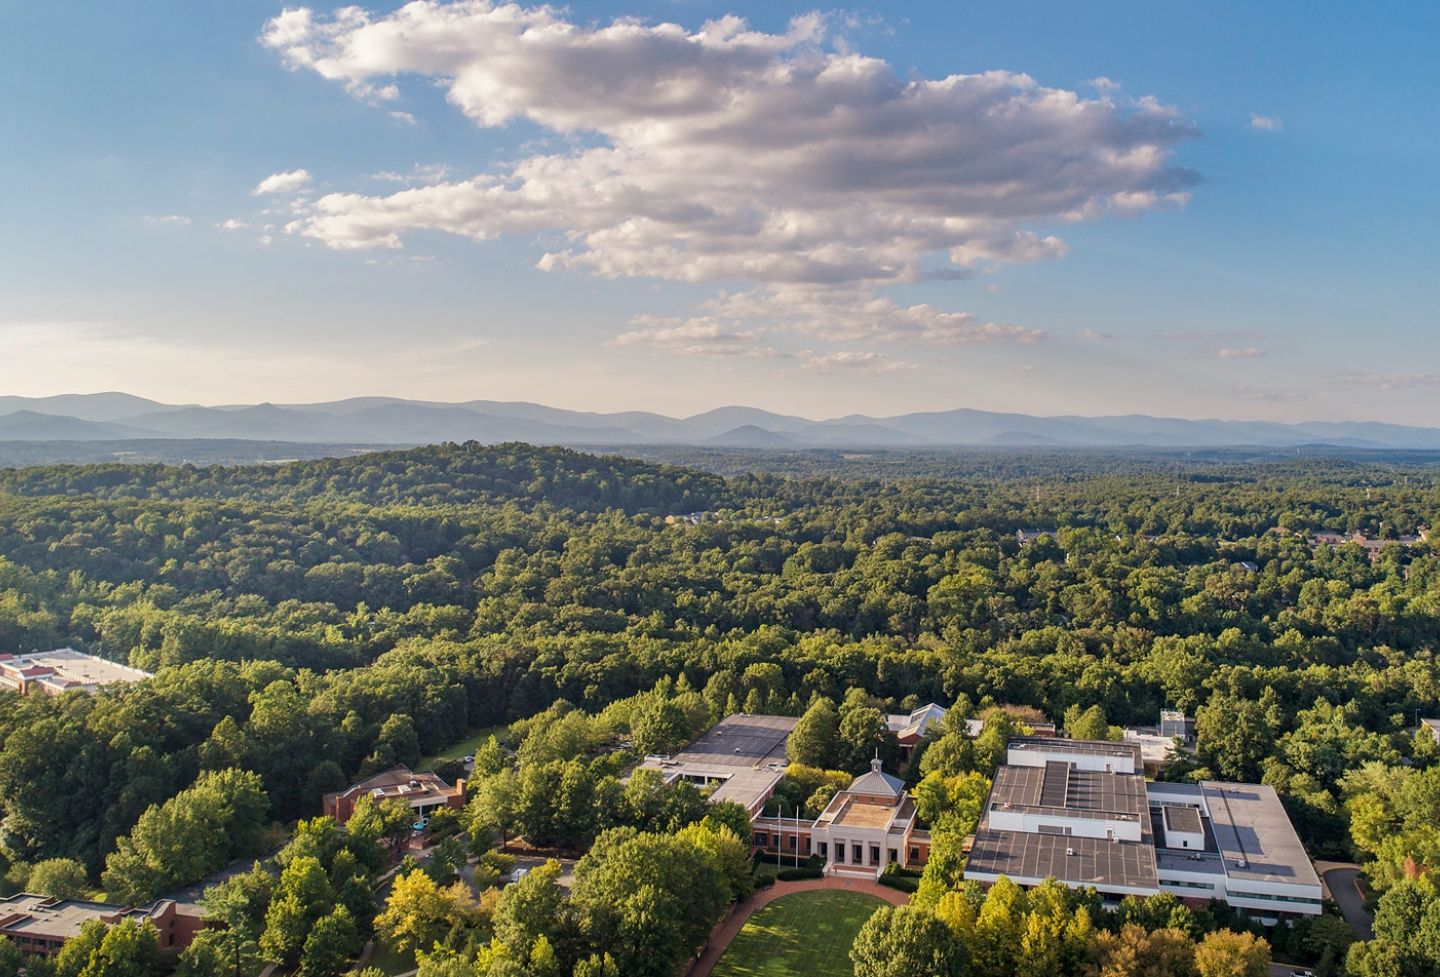 UVA Law from the air